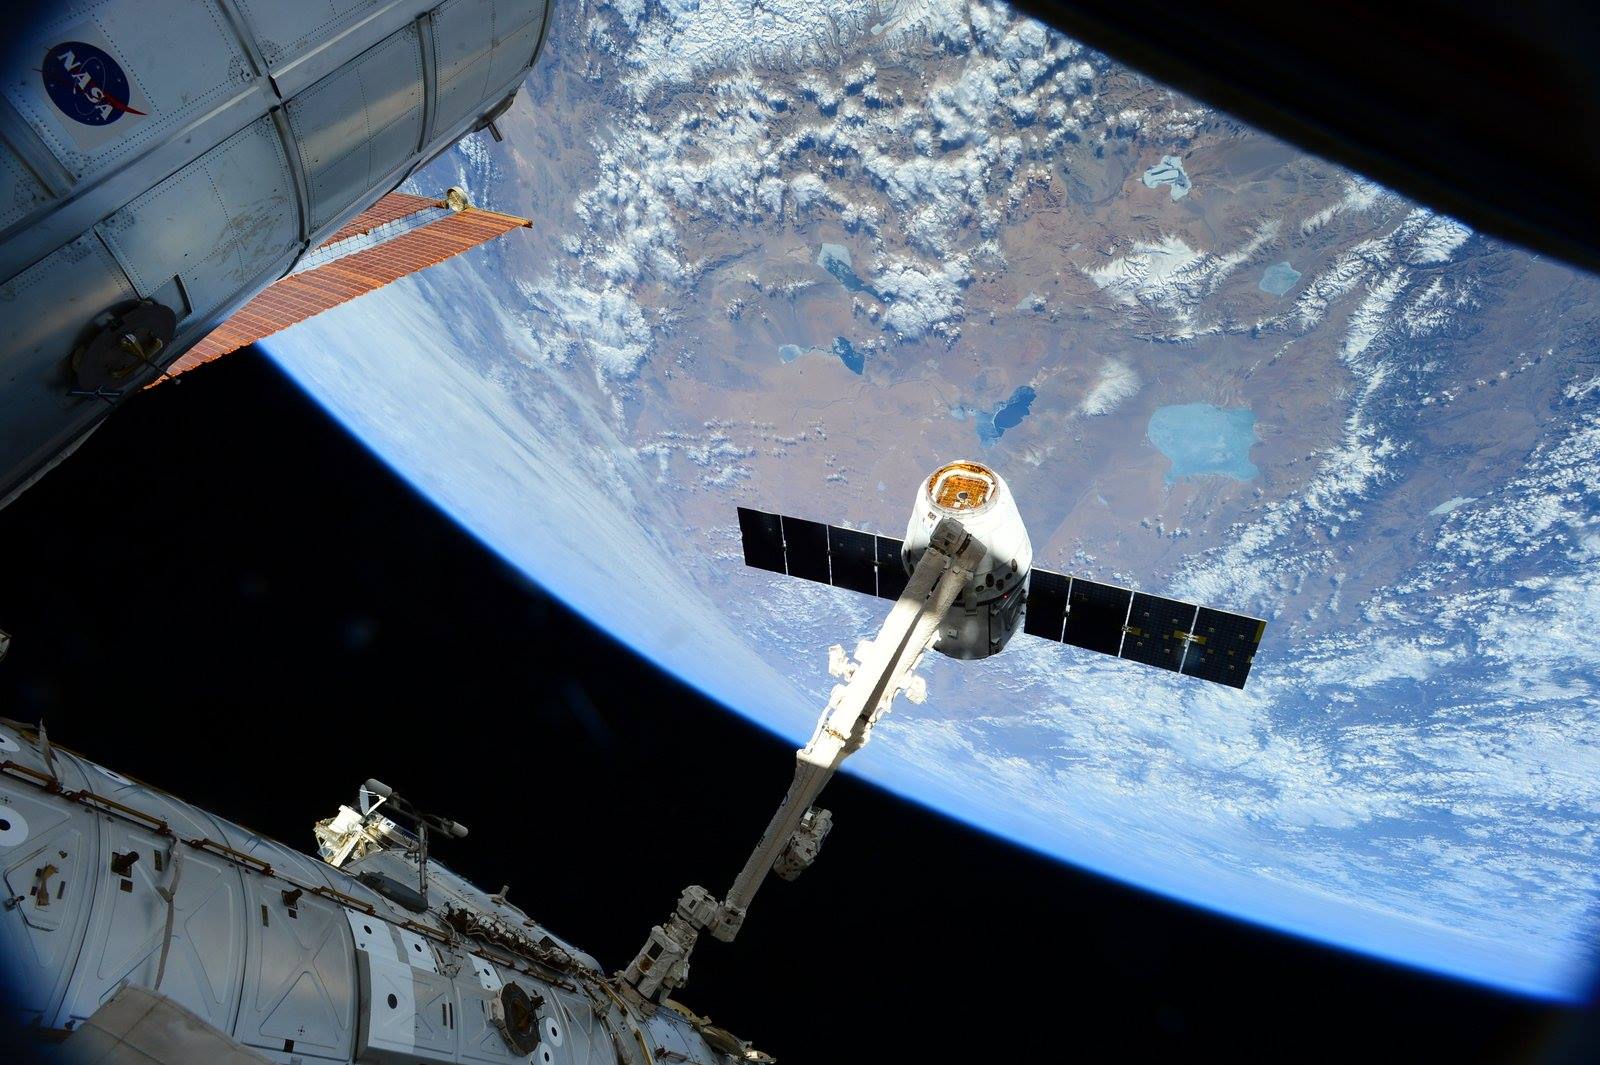 Like its predecessors, the CRS-7 Dragon will be grappled by the 57.7-foot-long (17.6-meter) Canadarm2 and berthed at the Earth-facing (or "nadir") interface of the Harmony node. Photo: NASA